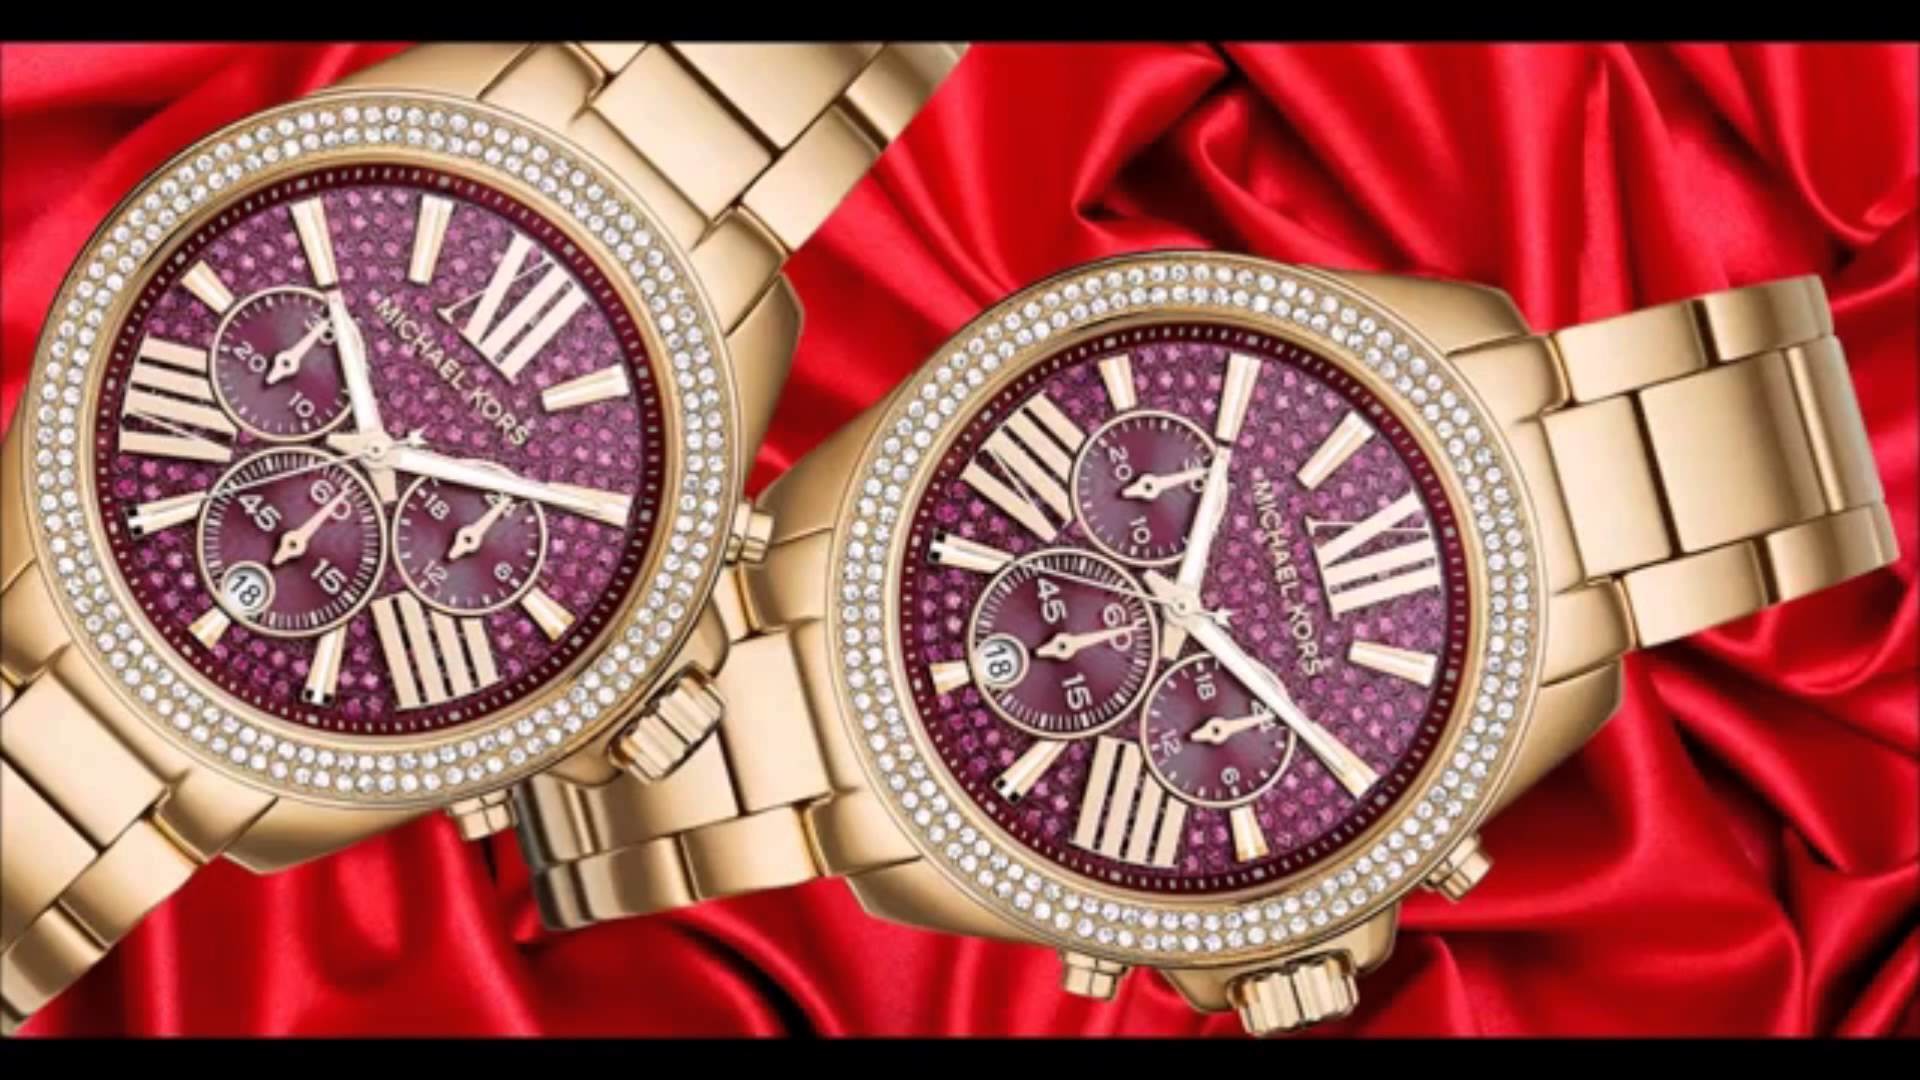 michael kors wallpaper android wallpapers on michael kors wallpapers